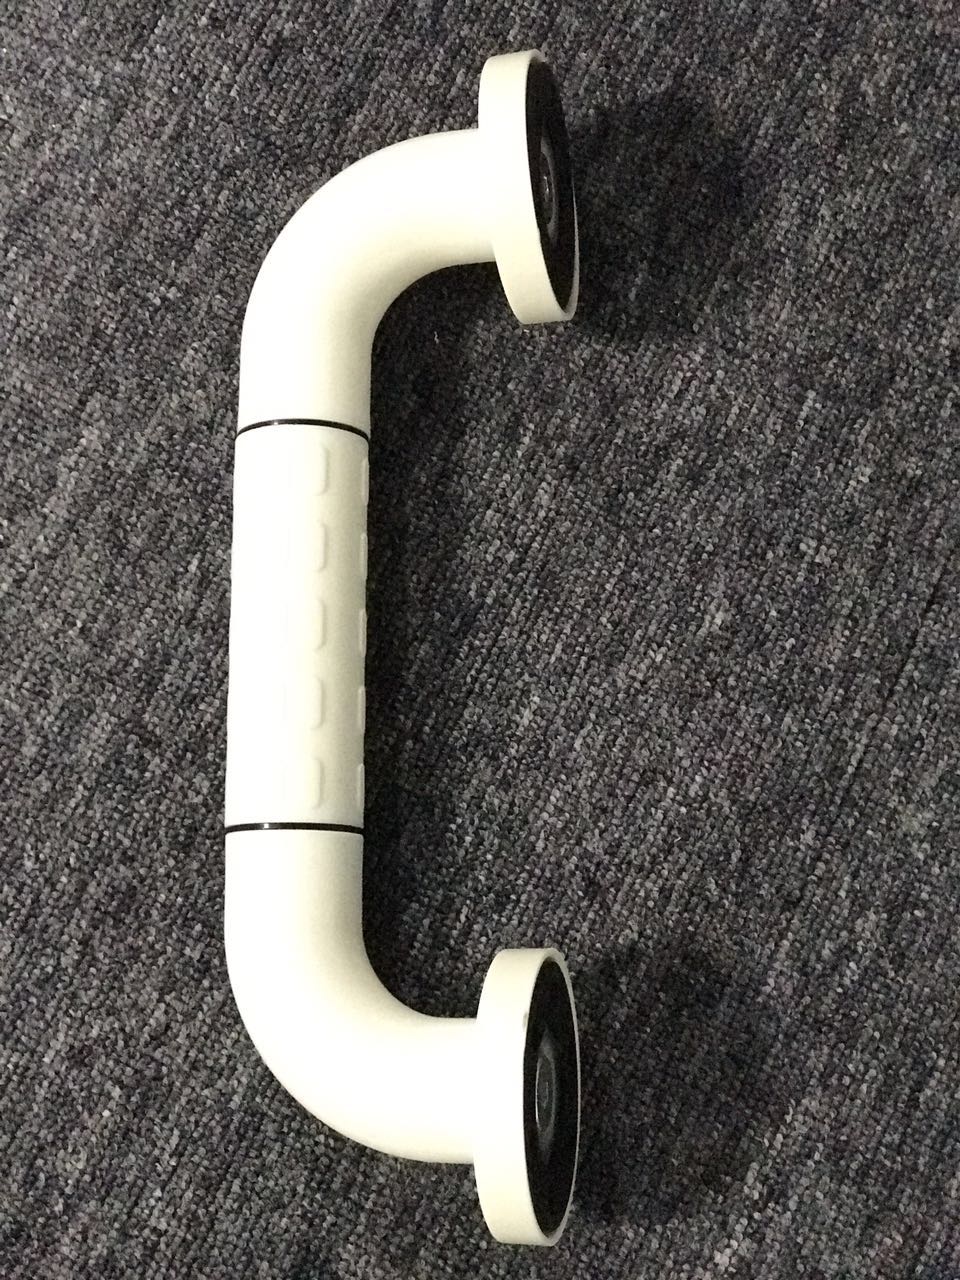 One-shaped handrail LE-W04